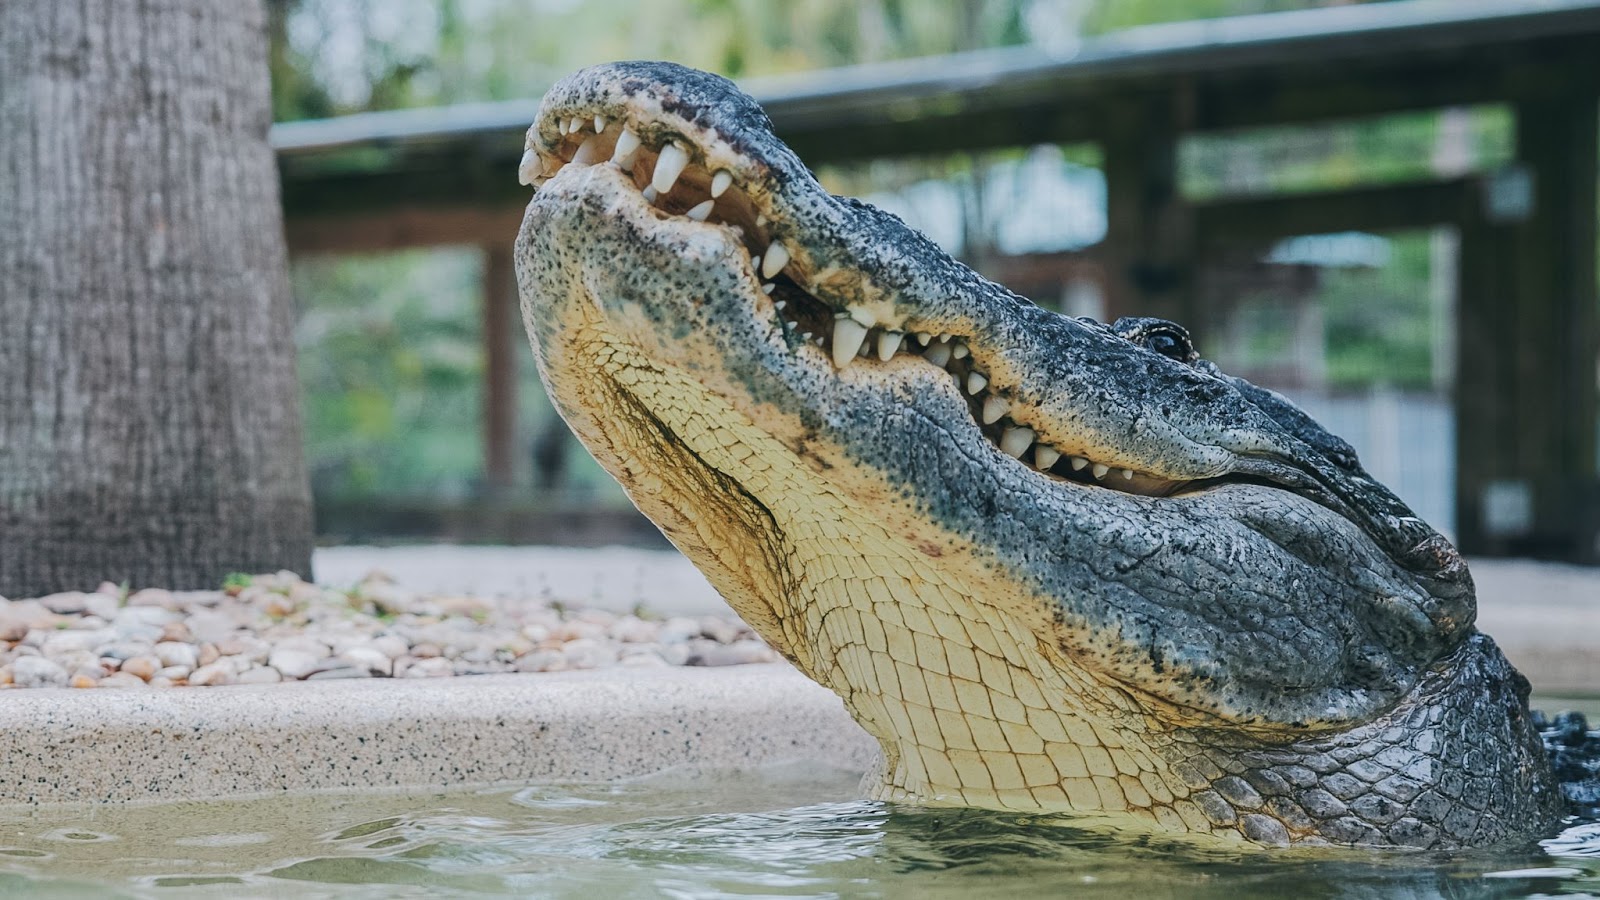 A crocodile sticks its head out from the pool at Wild Florida